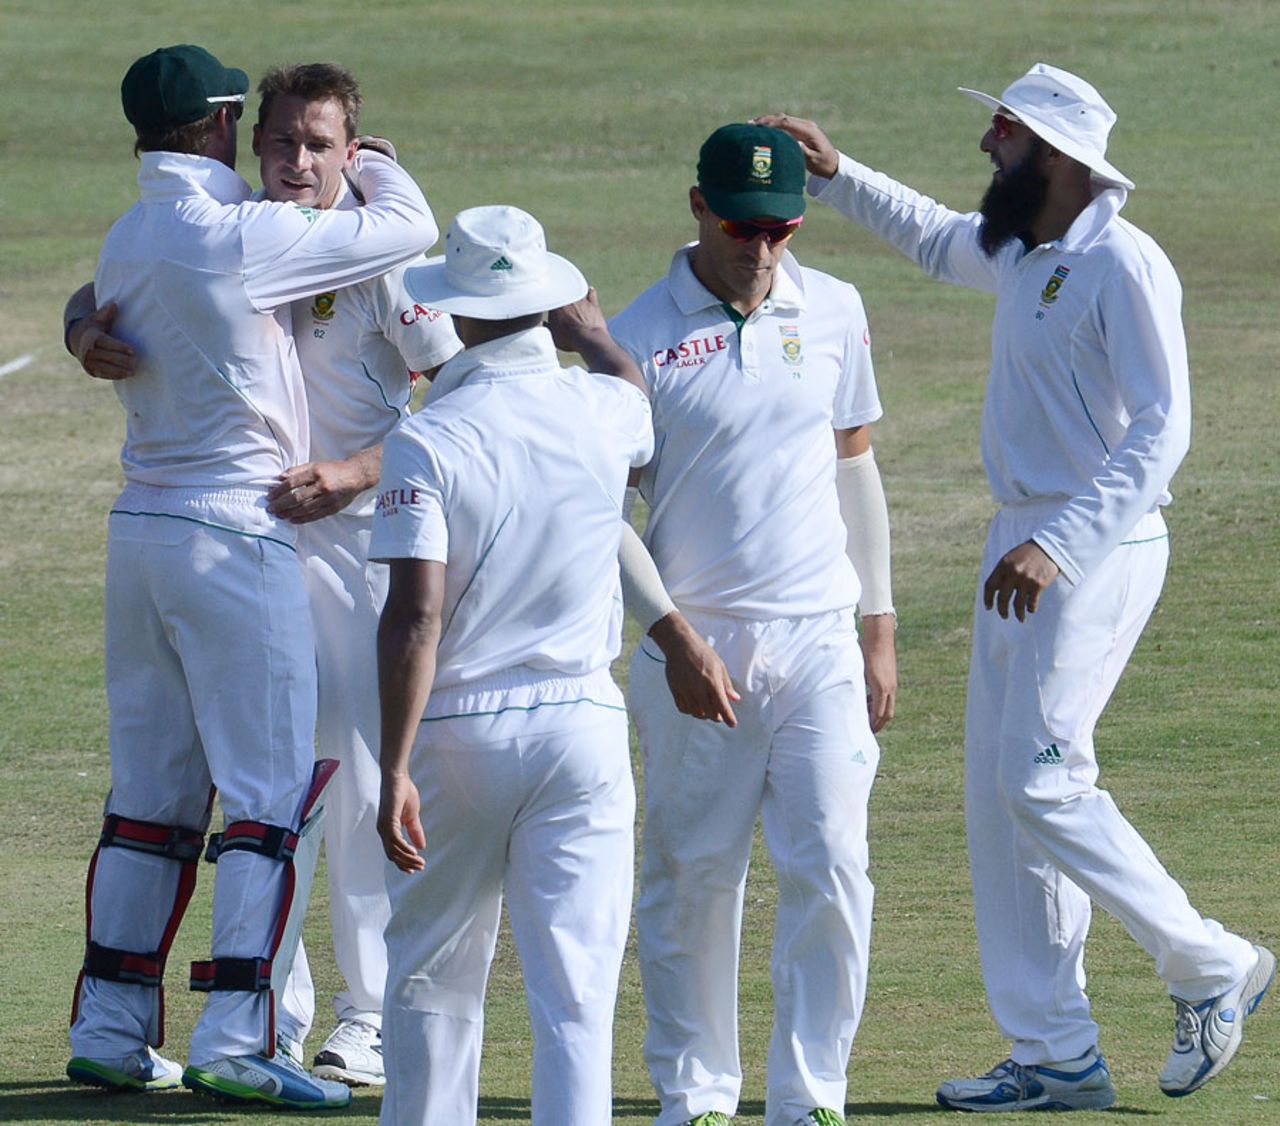 Dale Steyn celebrates with his team-mates , South Africa v Pakistan, 3rd Test, Centurion, 3rd day, February 24, 2013